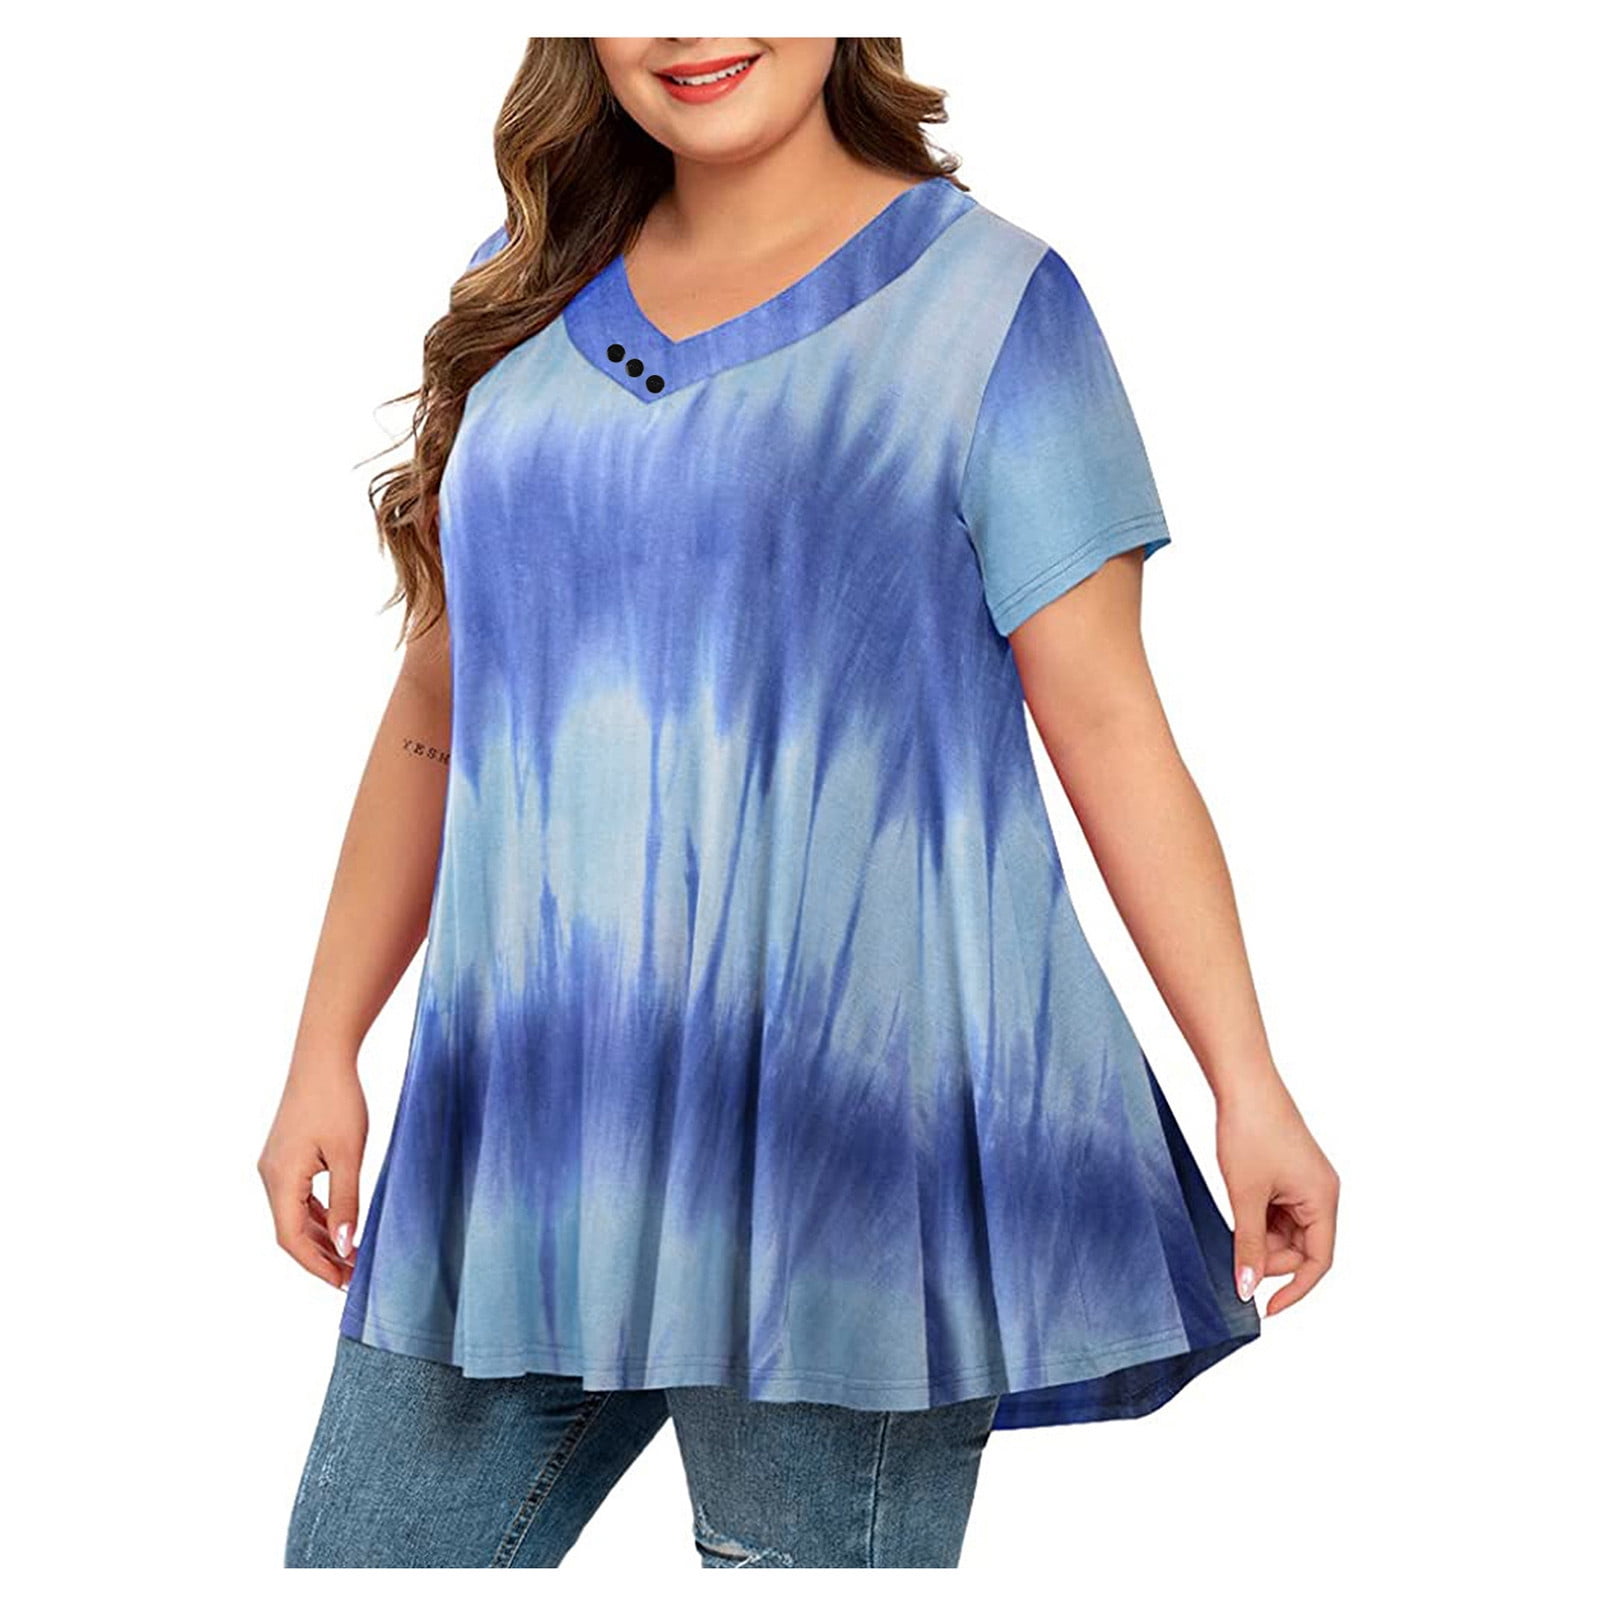 Wycnly Womens Tops Plus Size Flowy Pleated Swing Tunic Shirts Summer ...